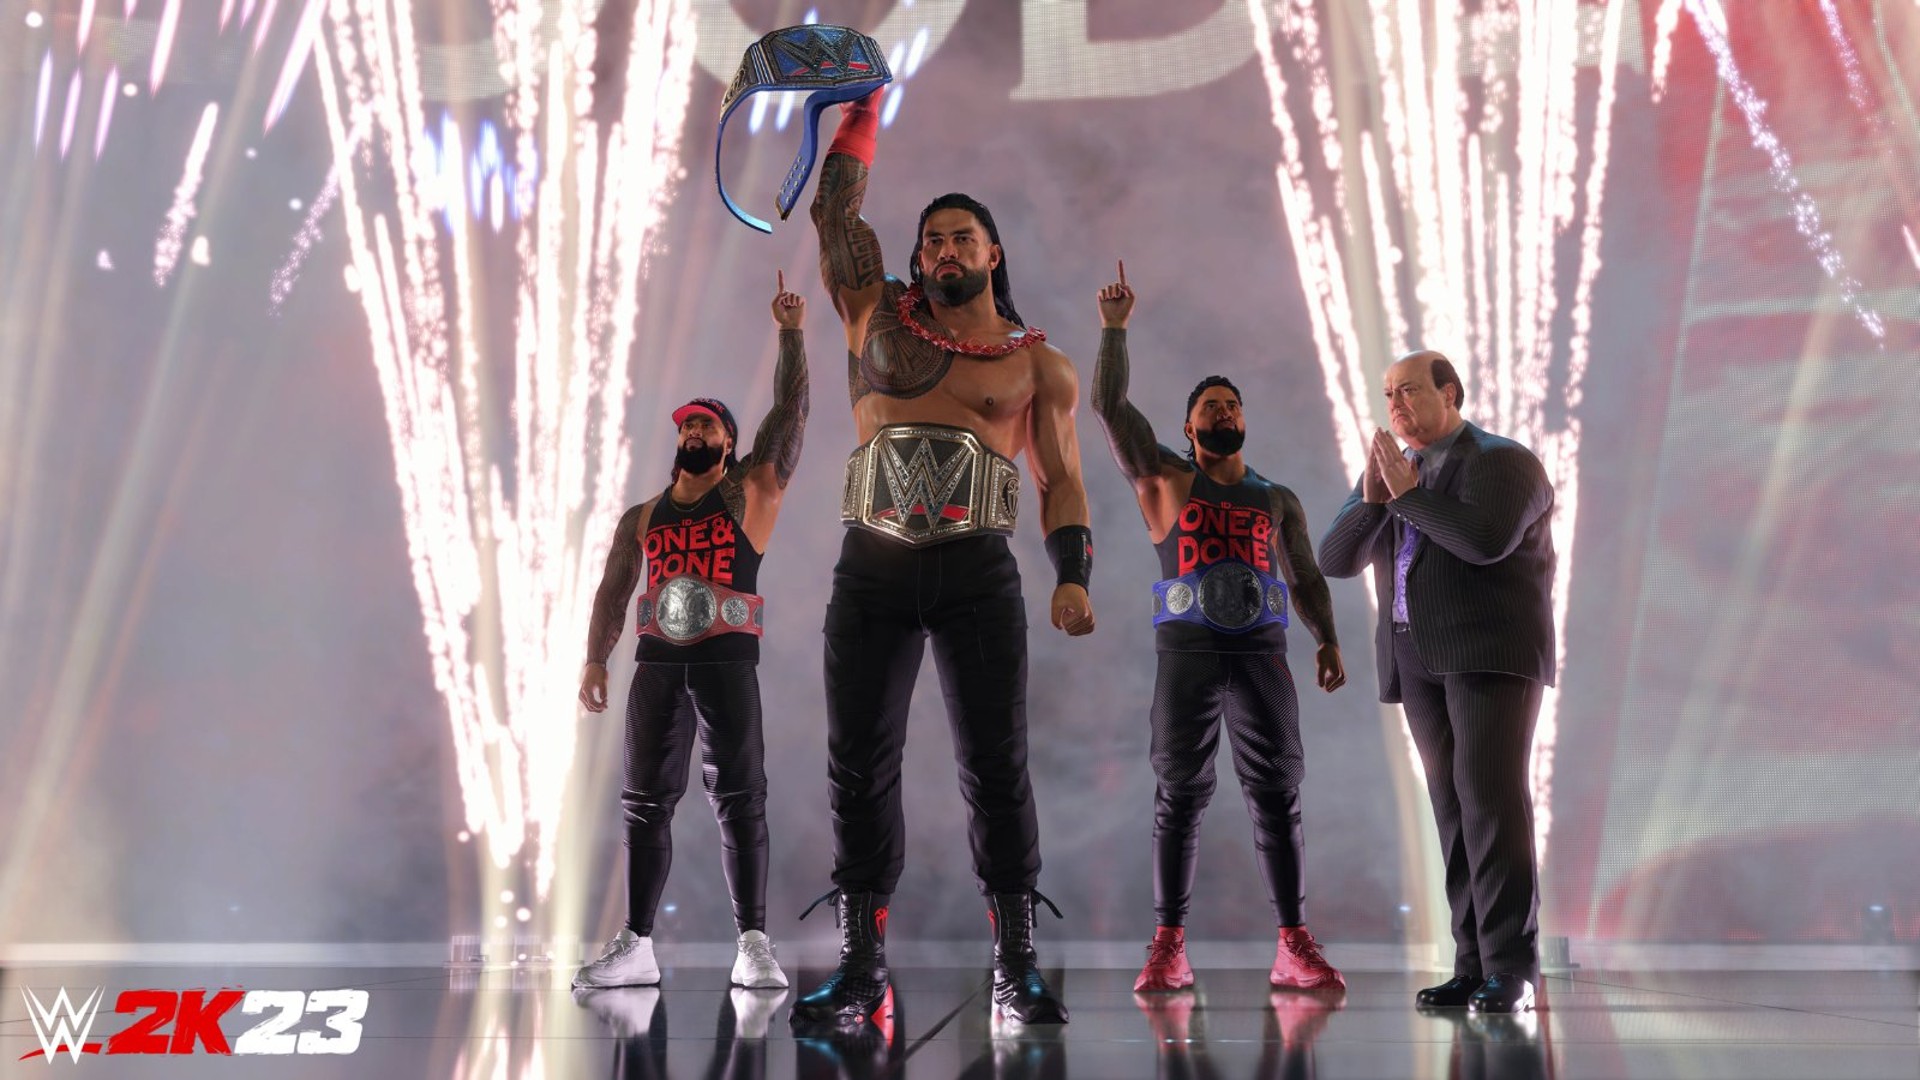 WWE 2K23 review: The series is finally back on top form